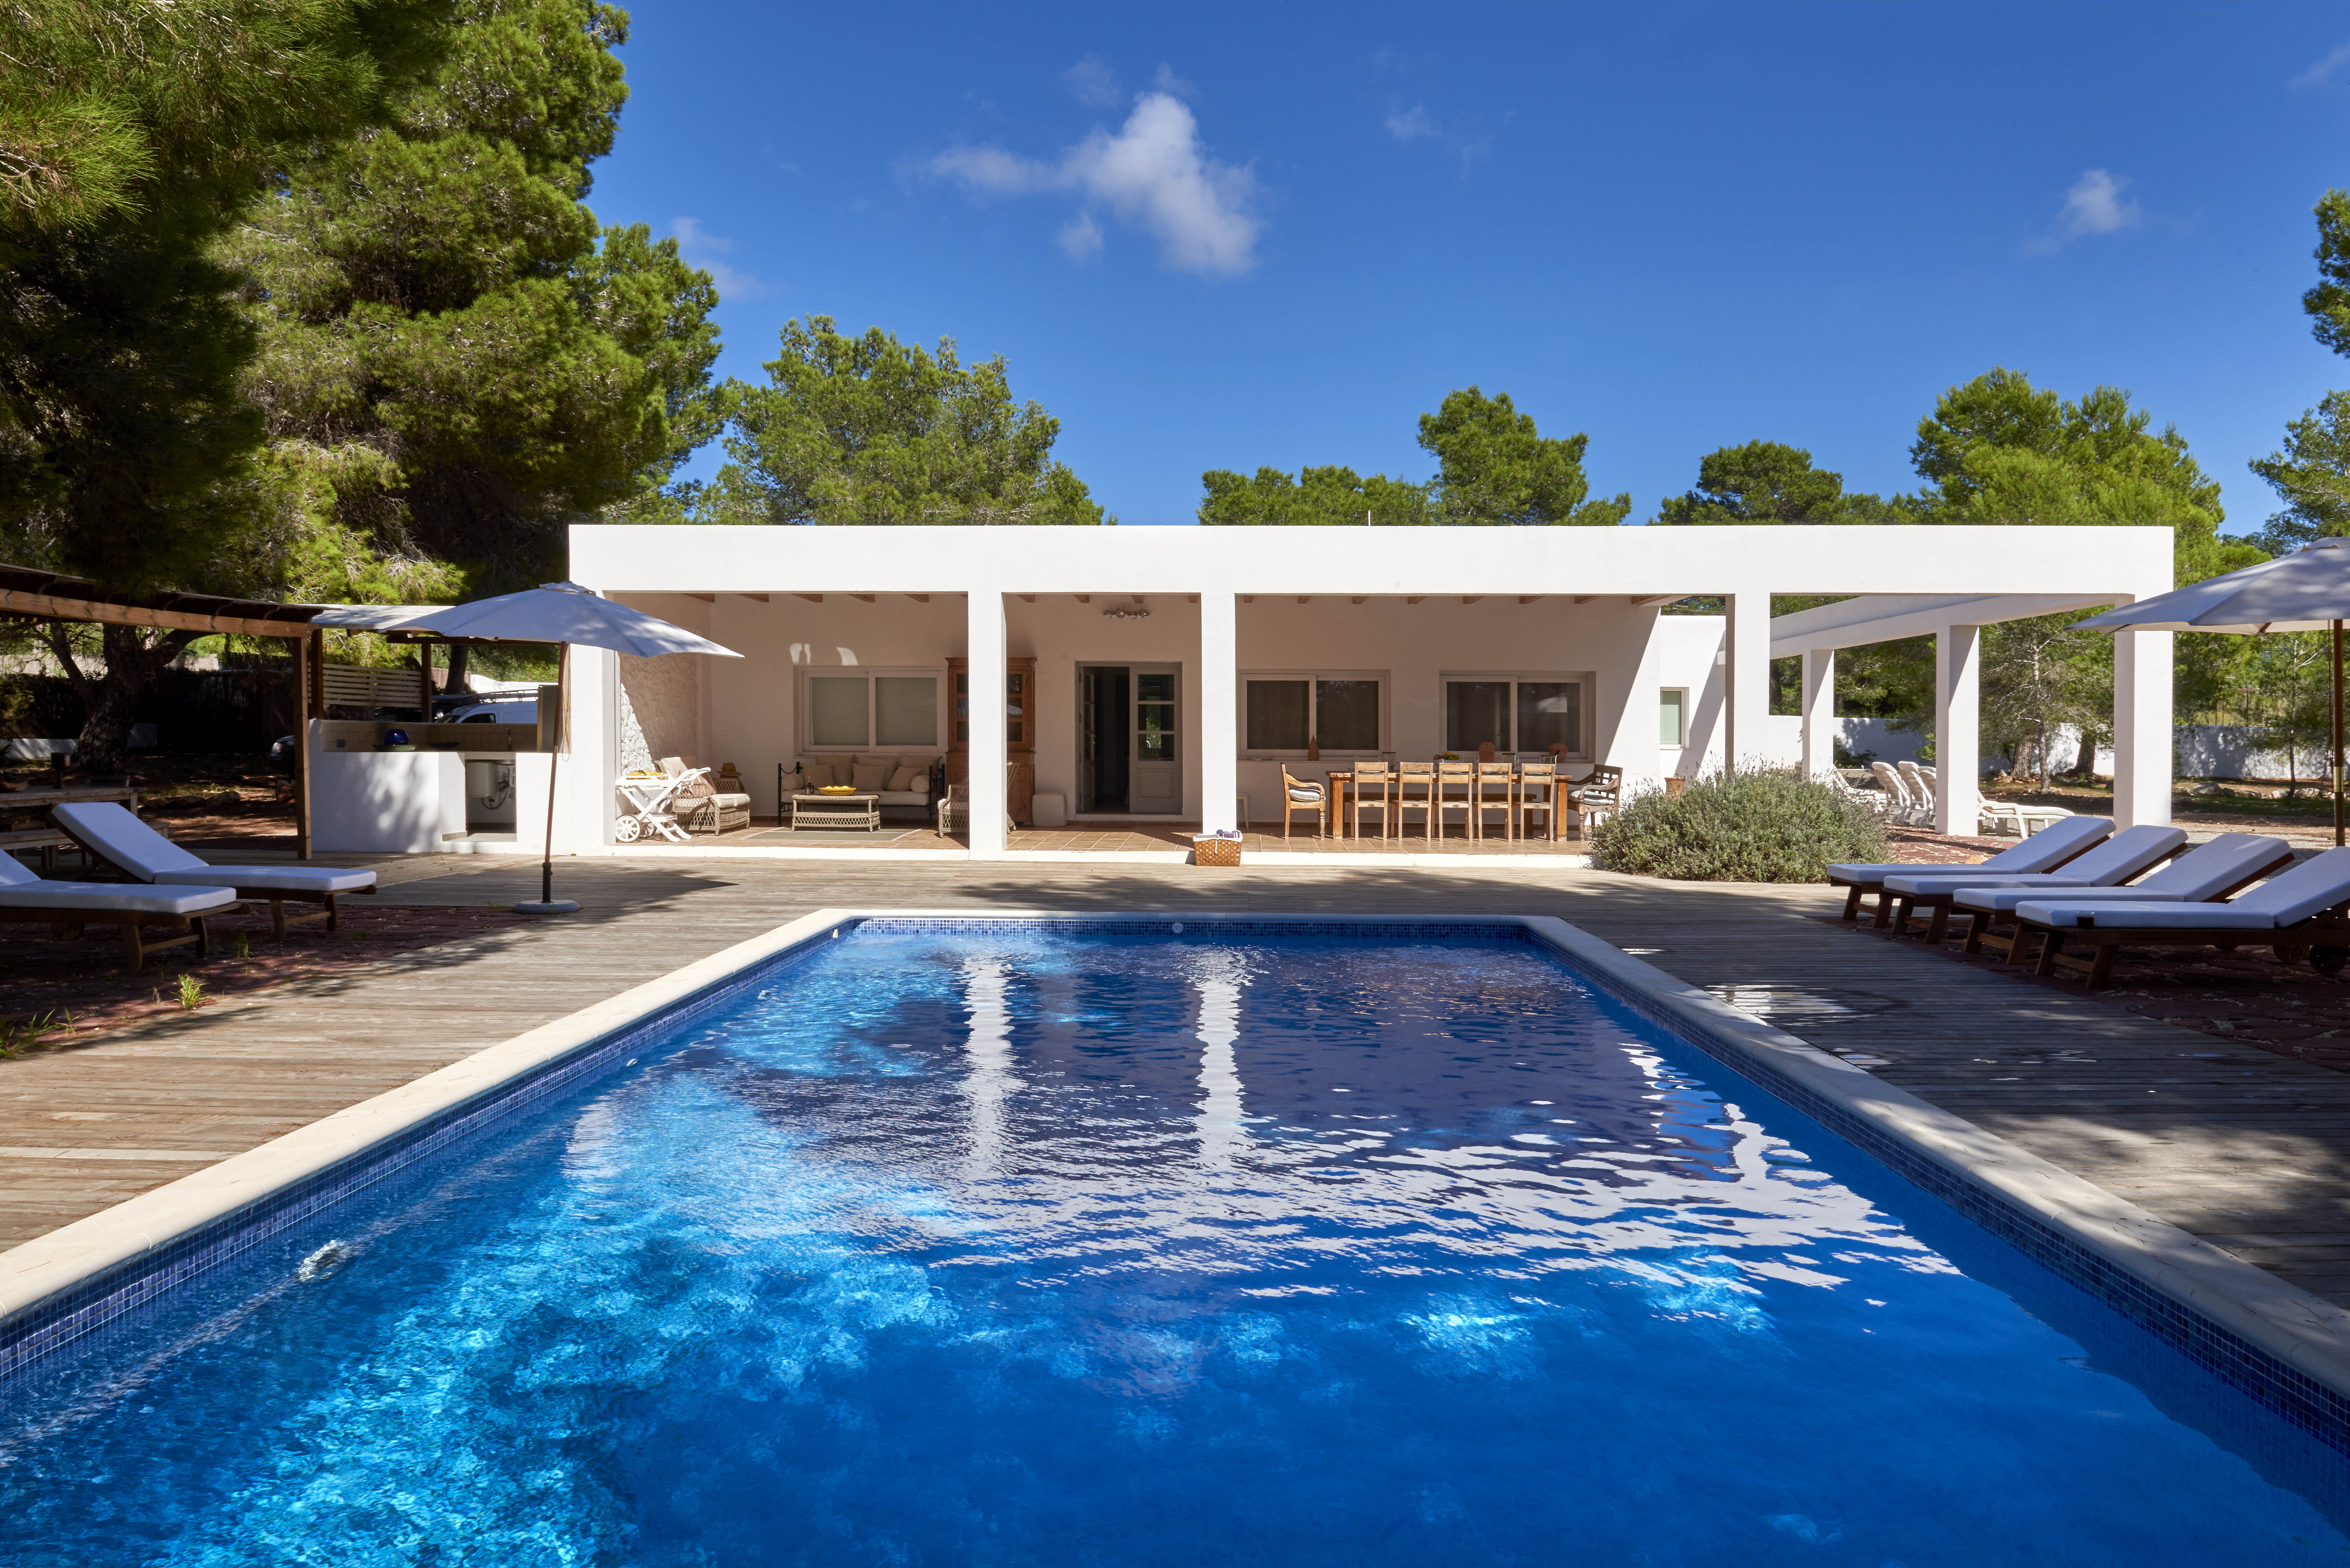 Lovely villa in the middle of the woods close to Cala Jondal